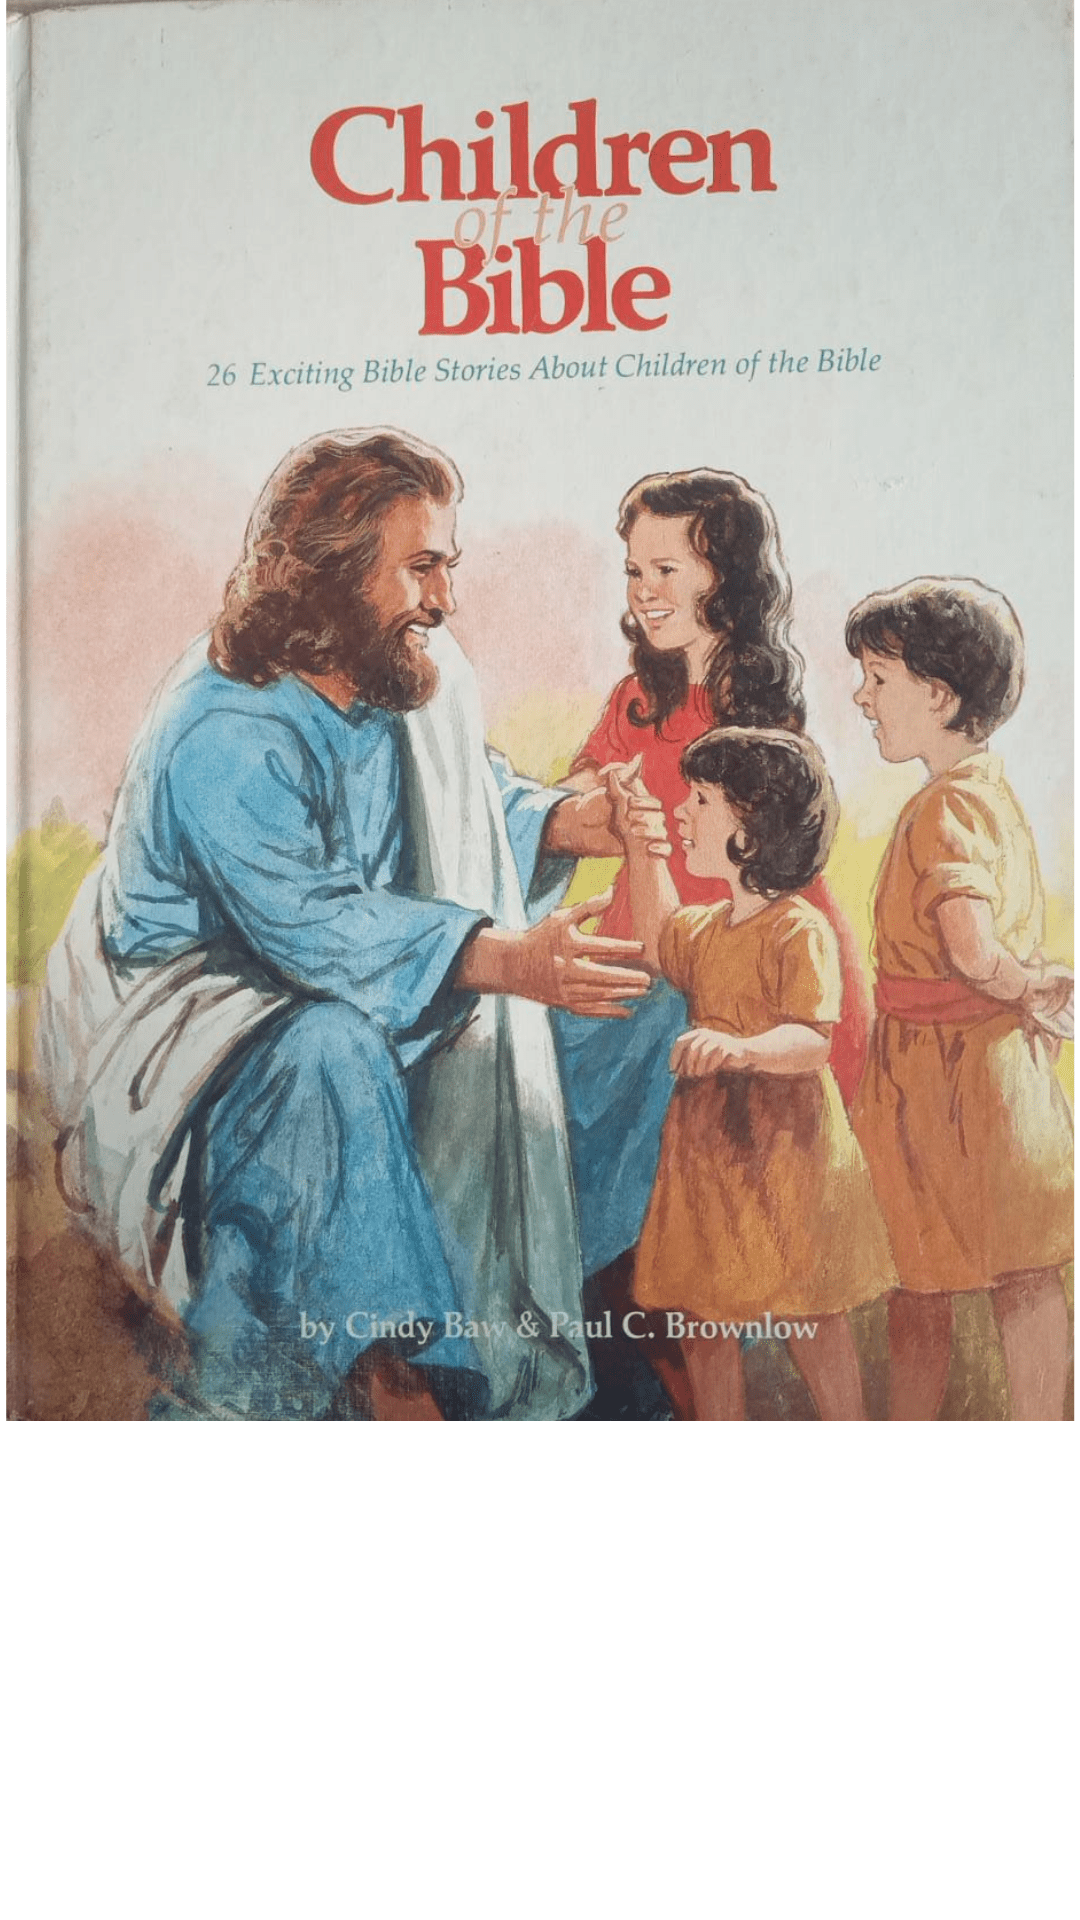 Children of the Bible by Cindy Baw